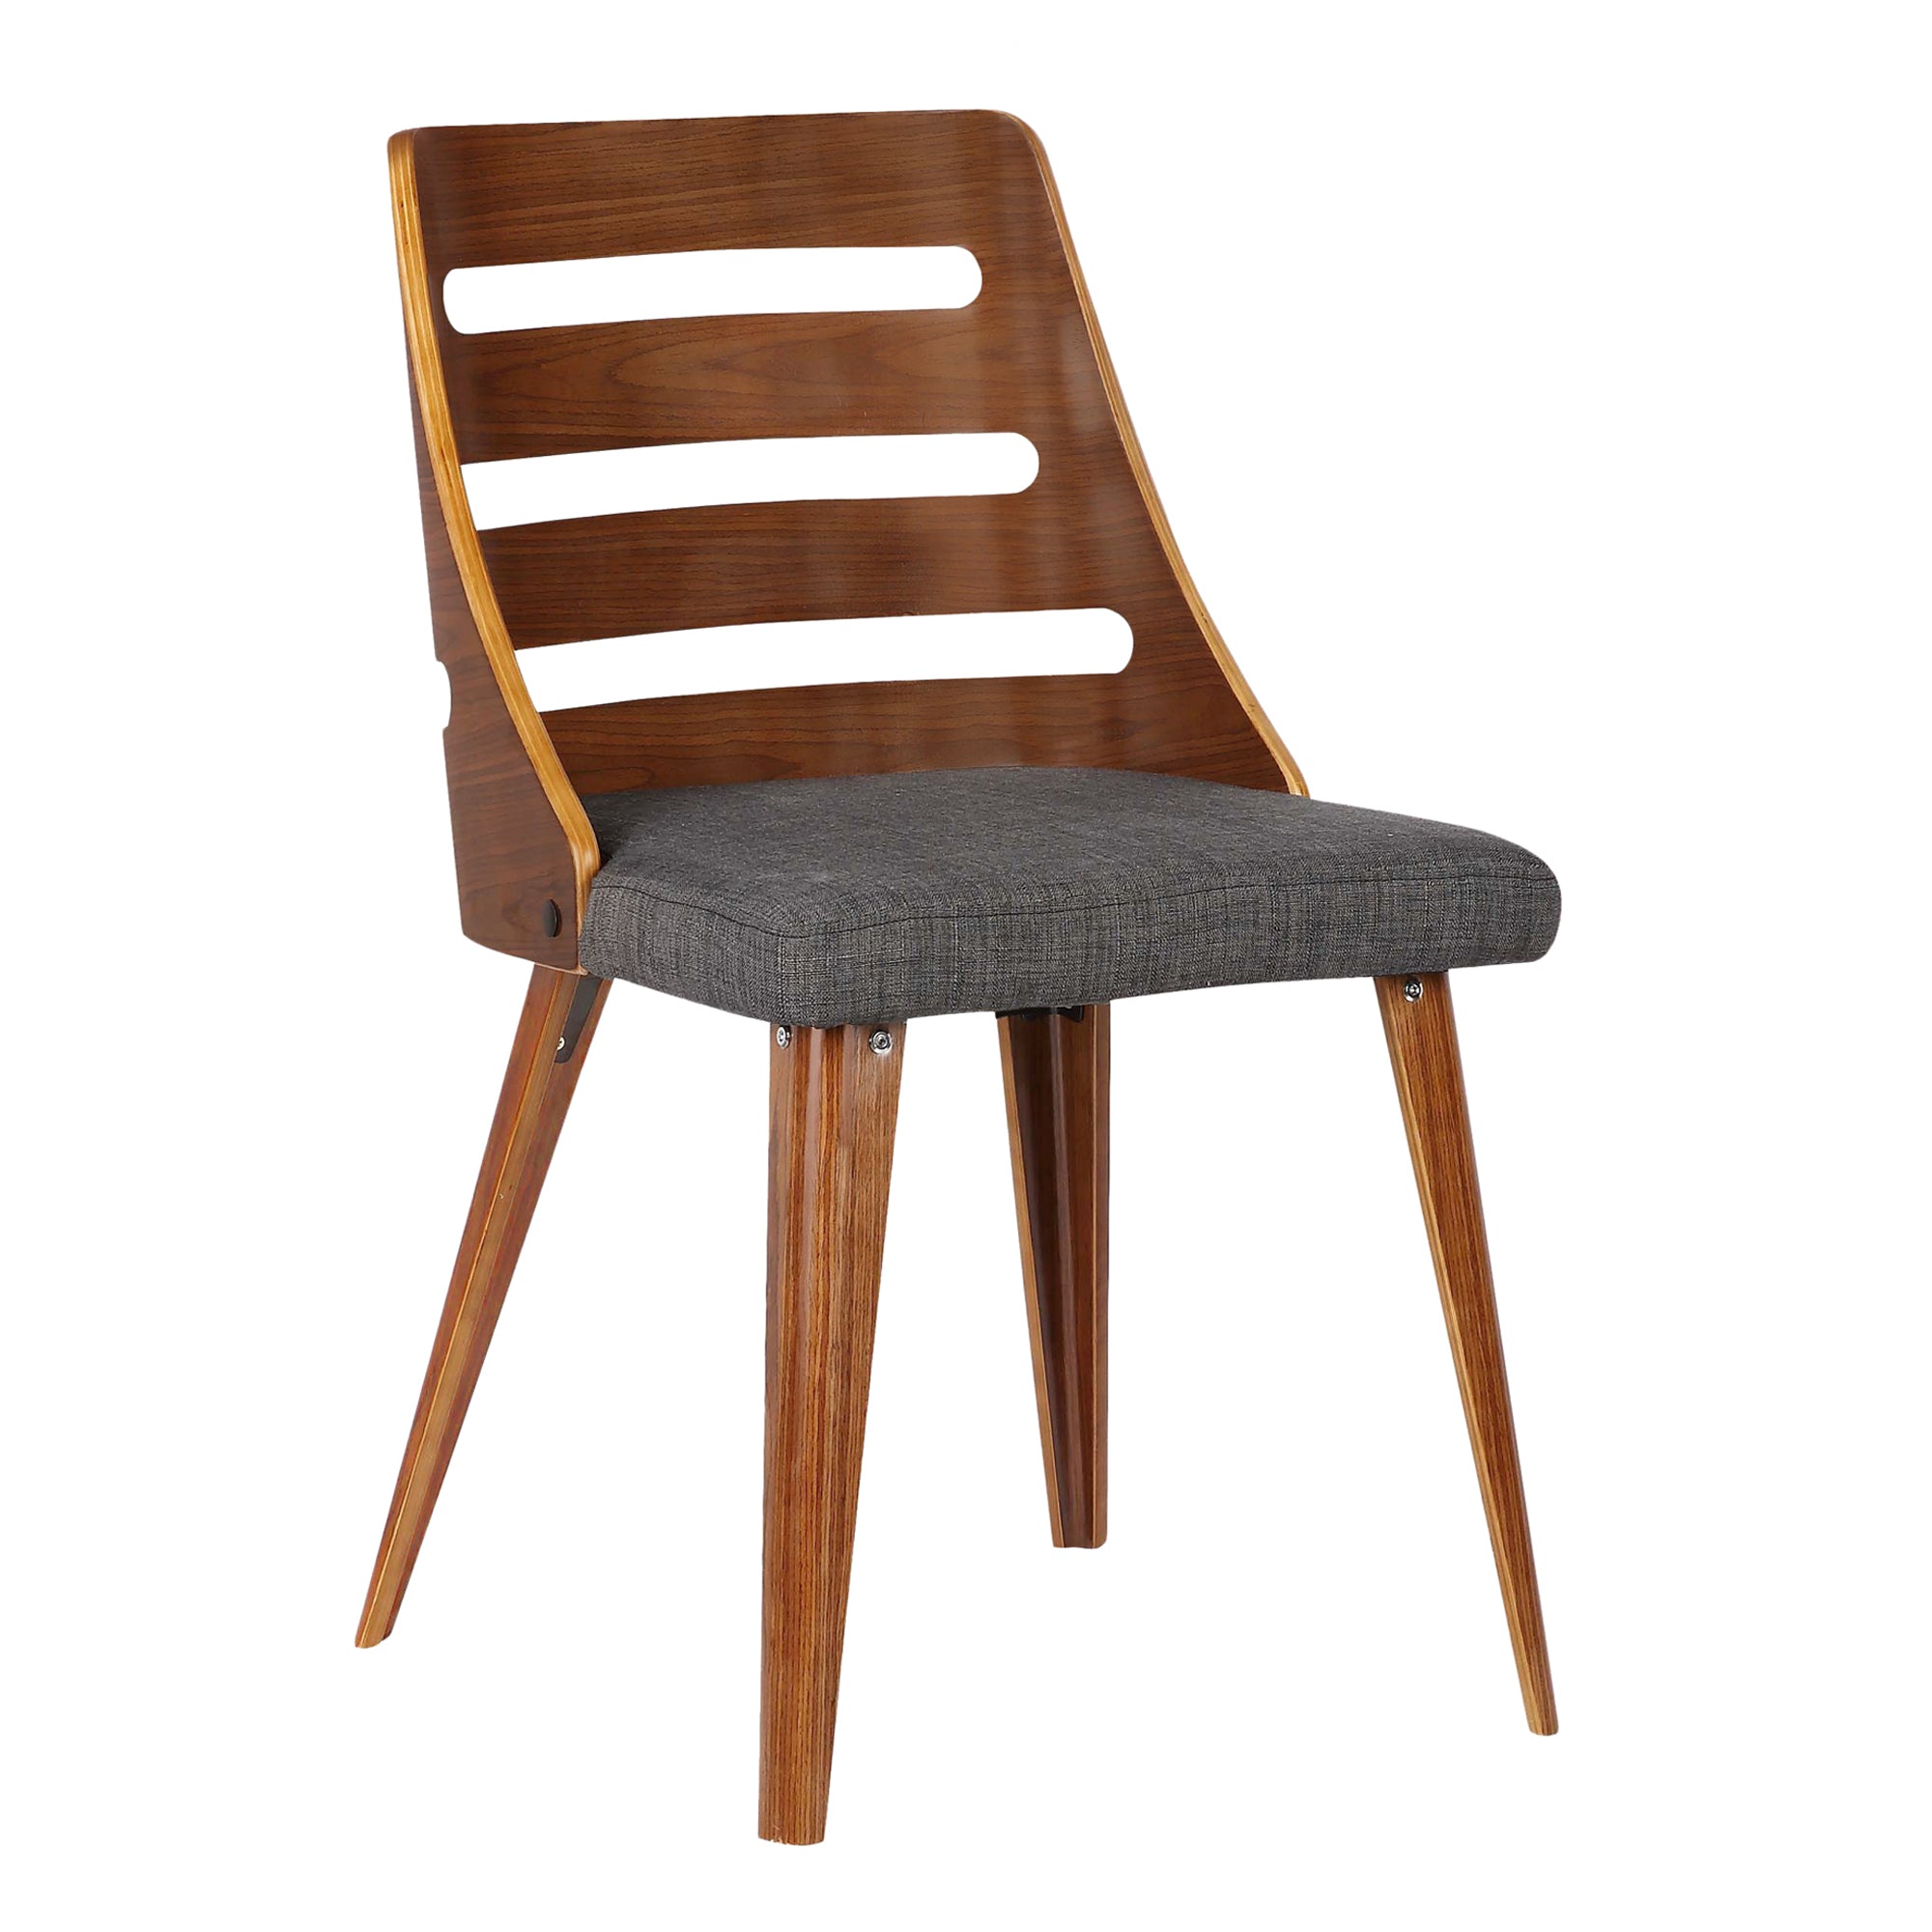 Armen Living Lcstsiwach Storm Mid-century Dining Chair In Walnut Wood And Charcoal Fabric